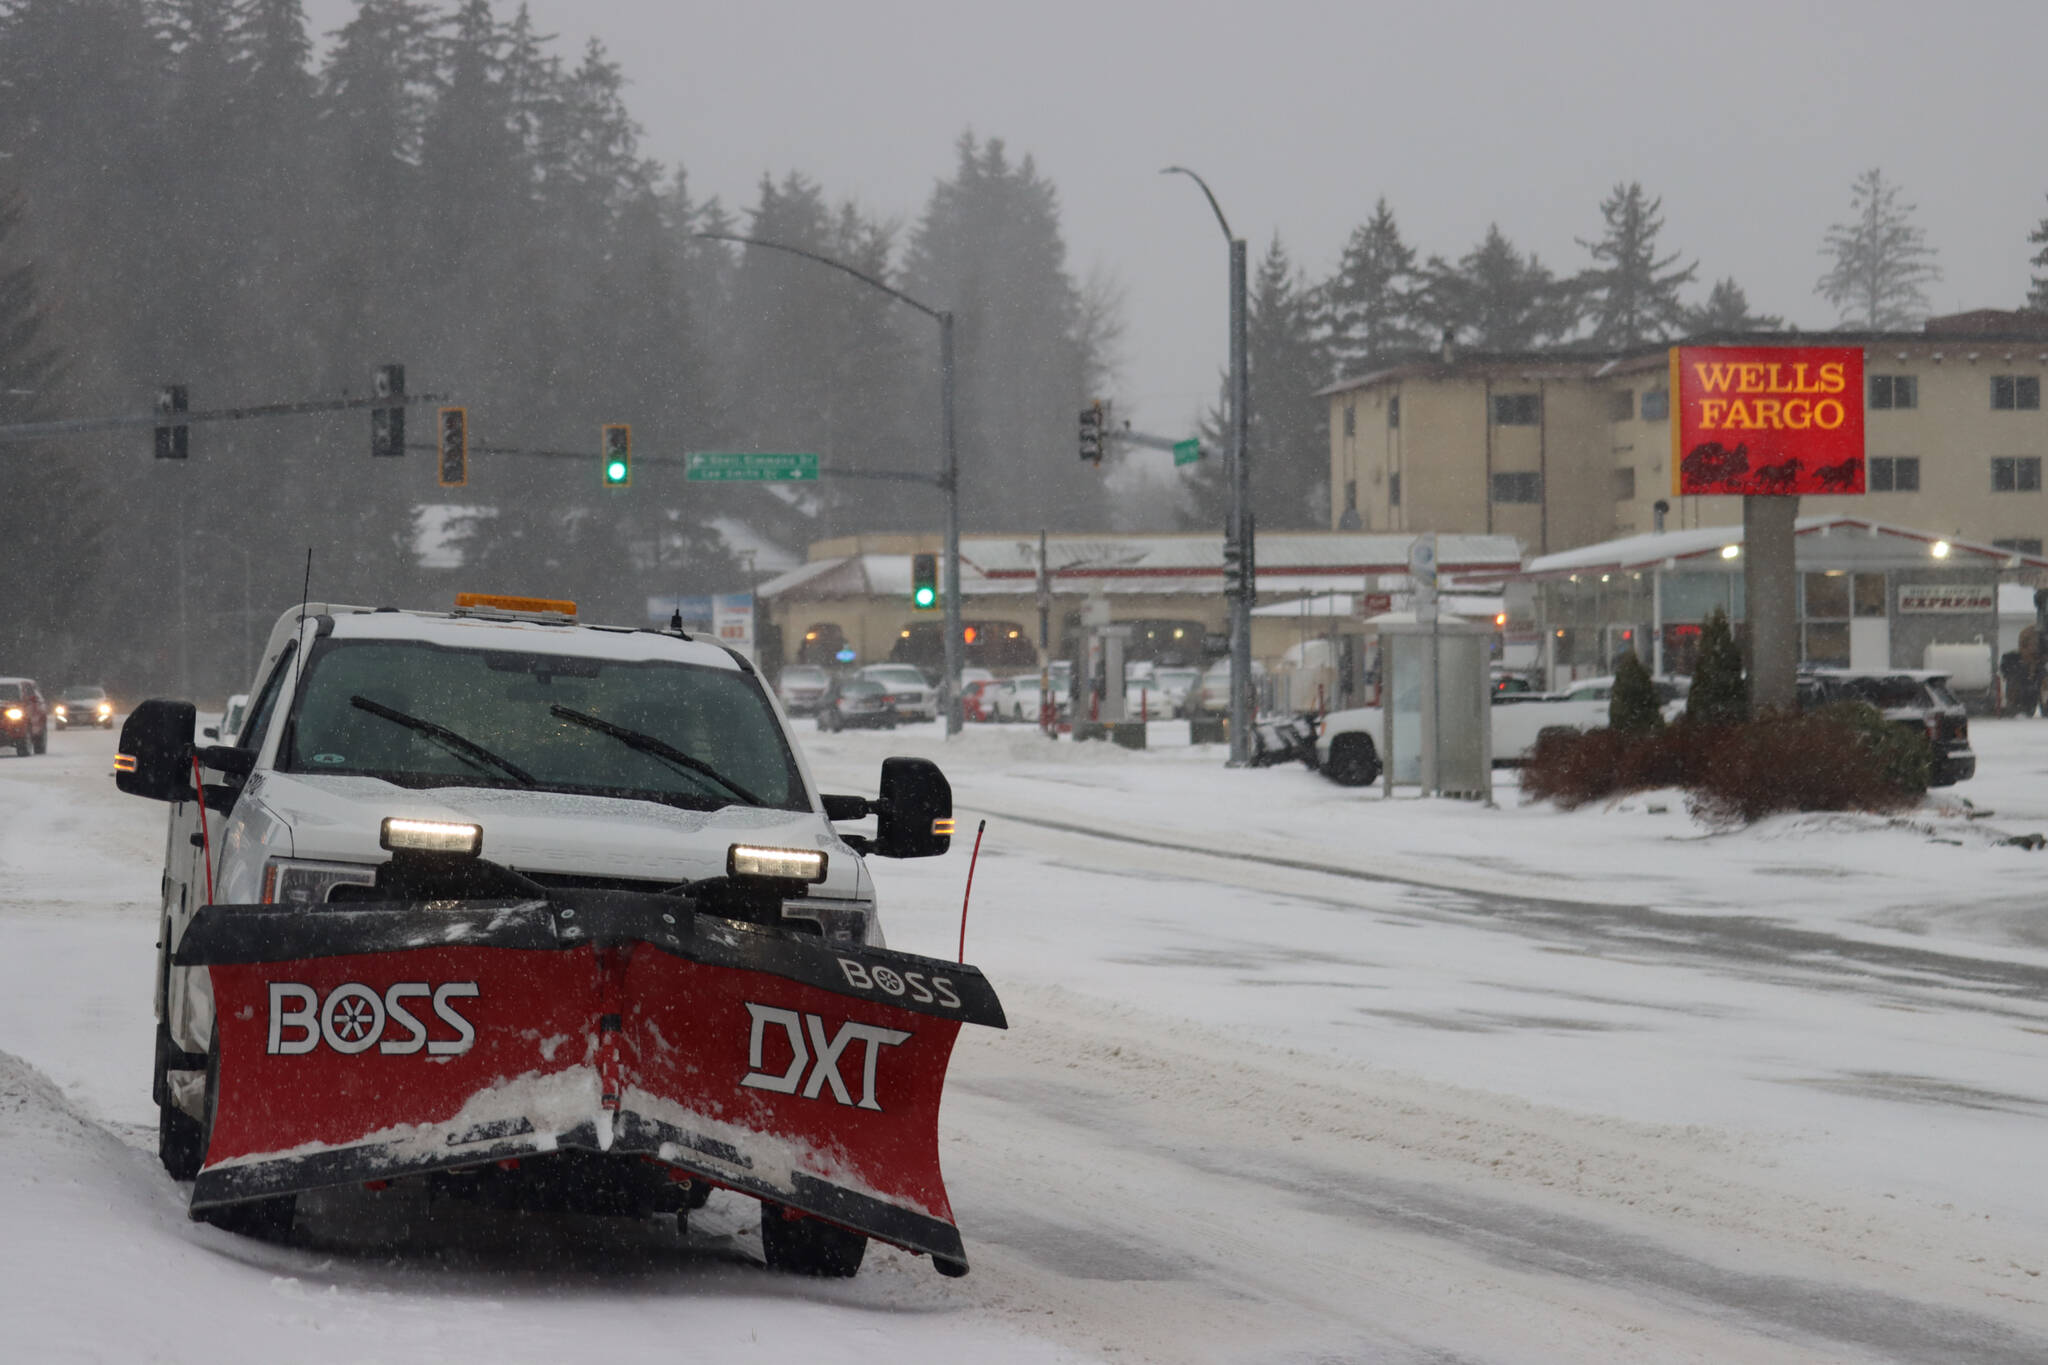 A snow plow pulls off of Glacier Highway to clear the sidewalks near a bus stop during heavy snow fall on Monday morning. (Jonson Kuhn / Juneau Empire)